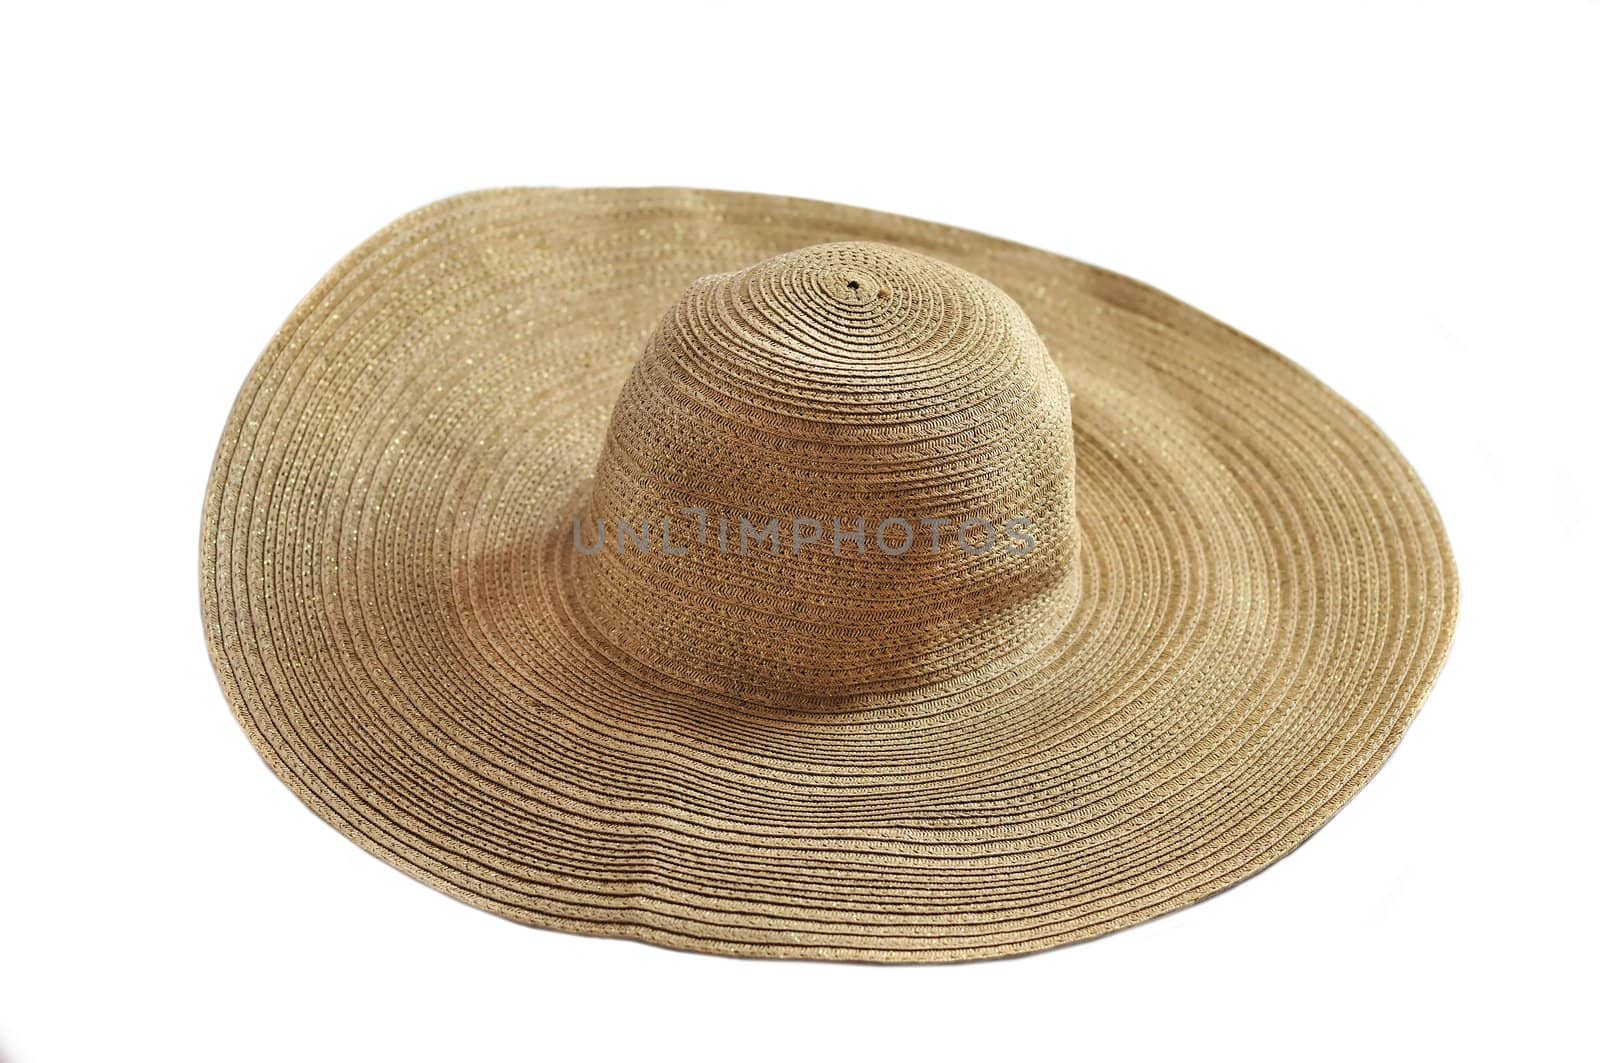 Straw hat isolated on the white background